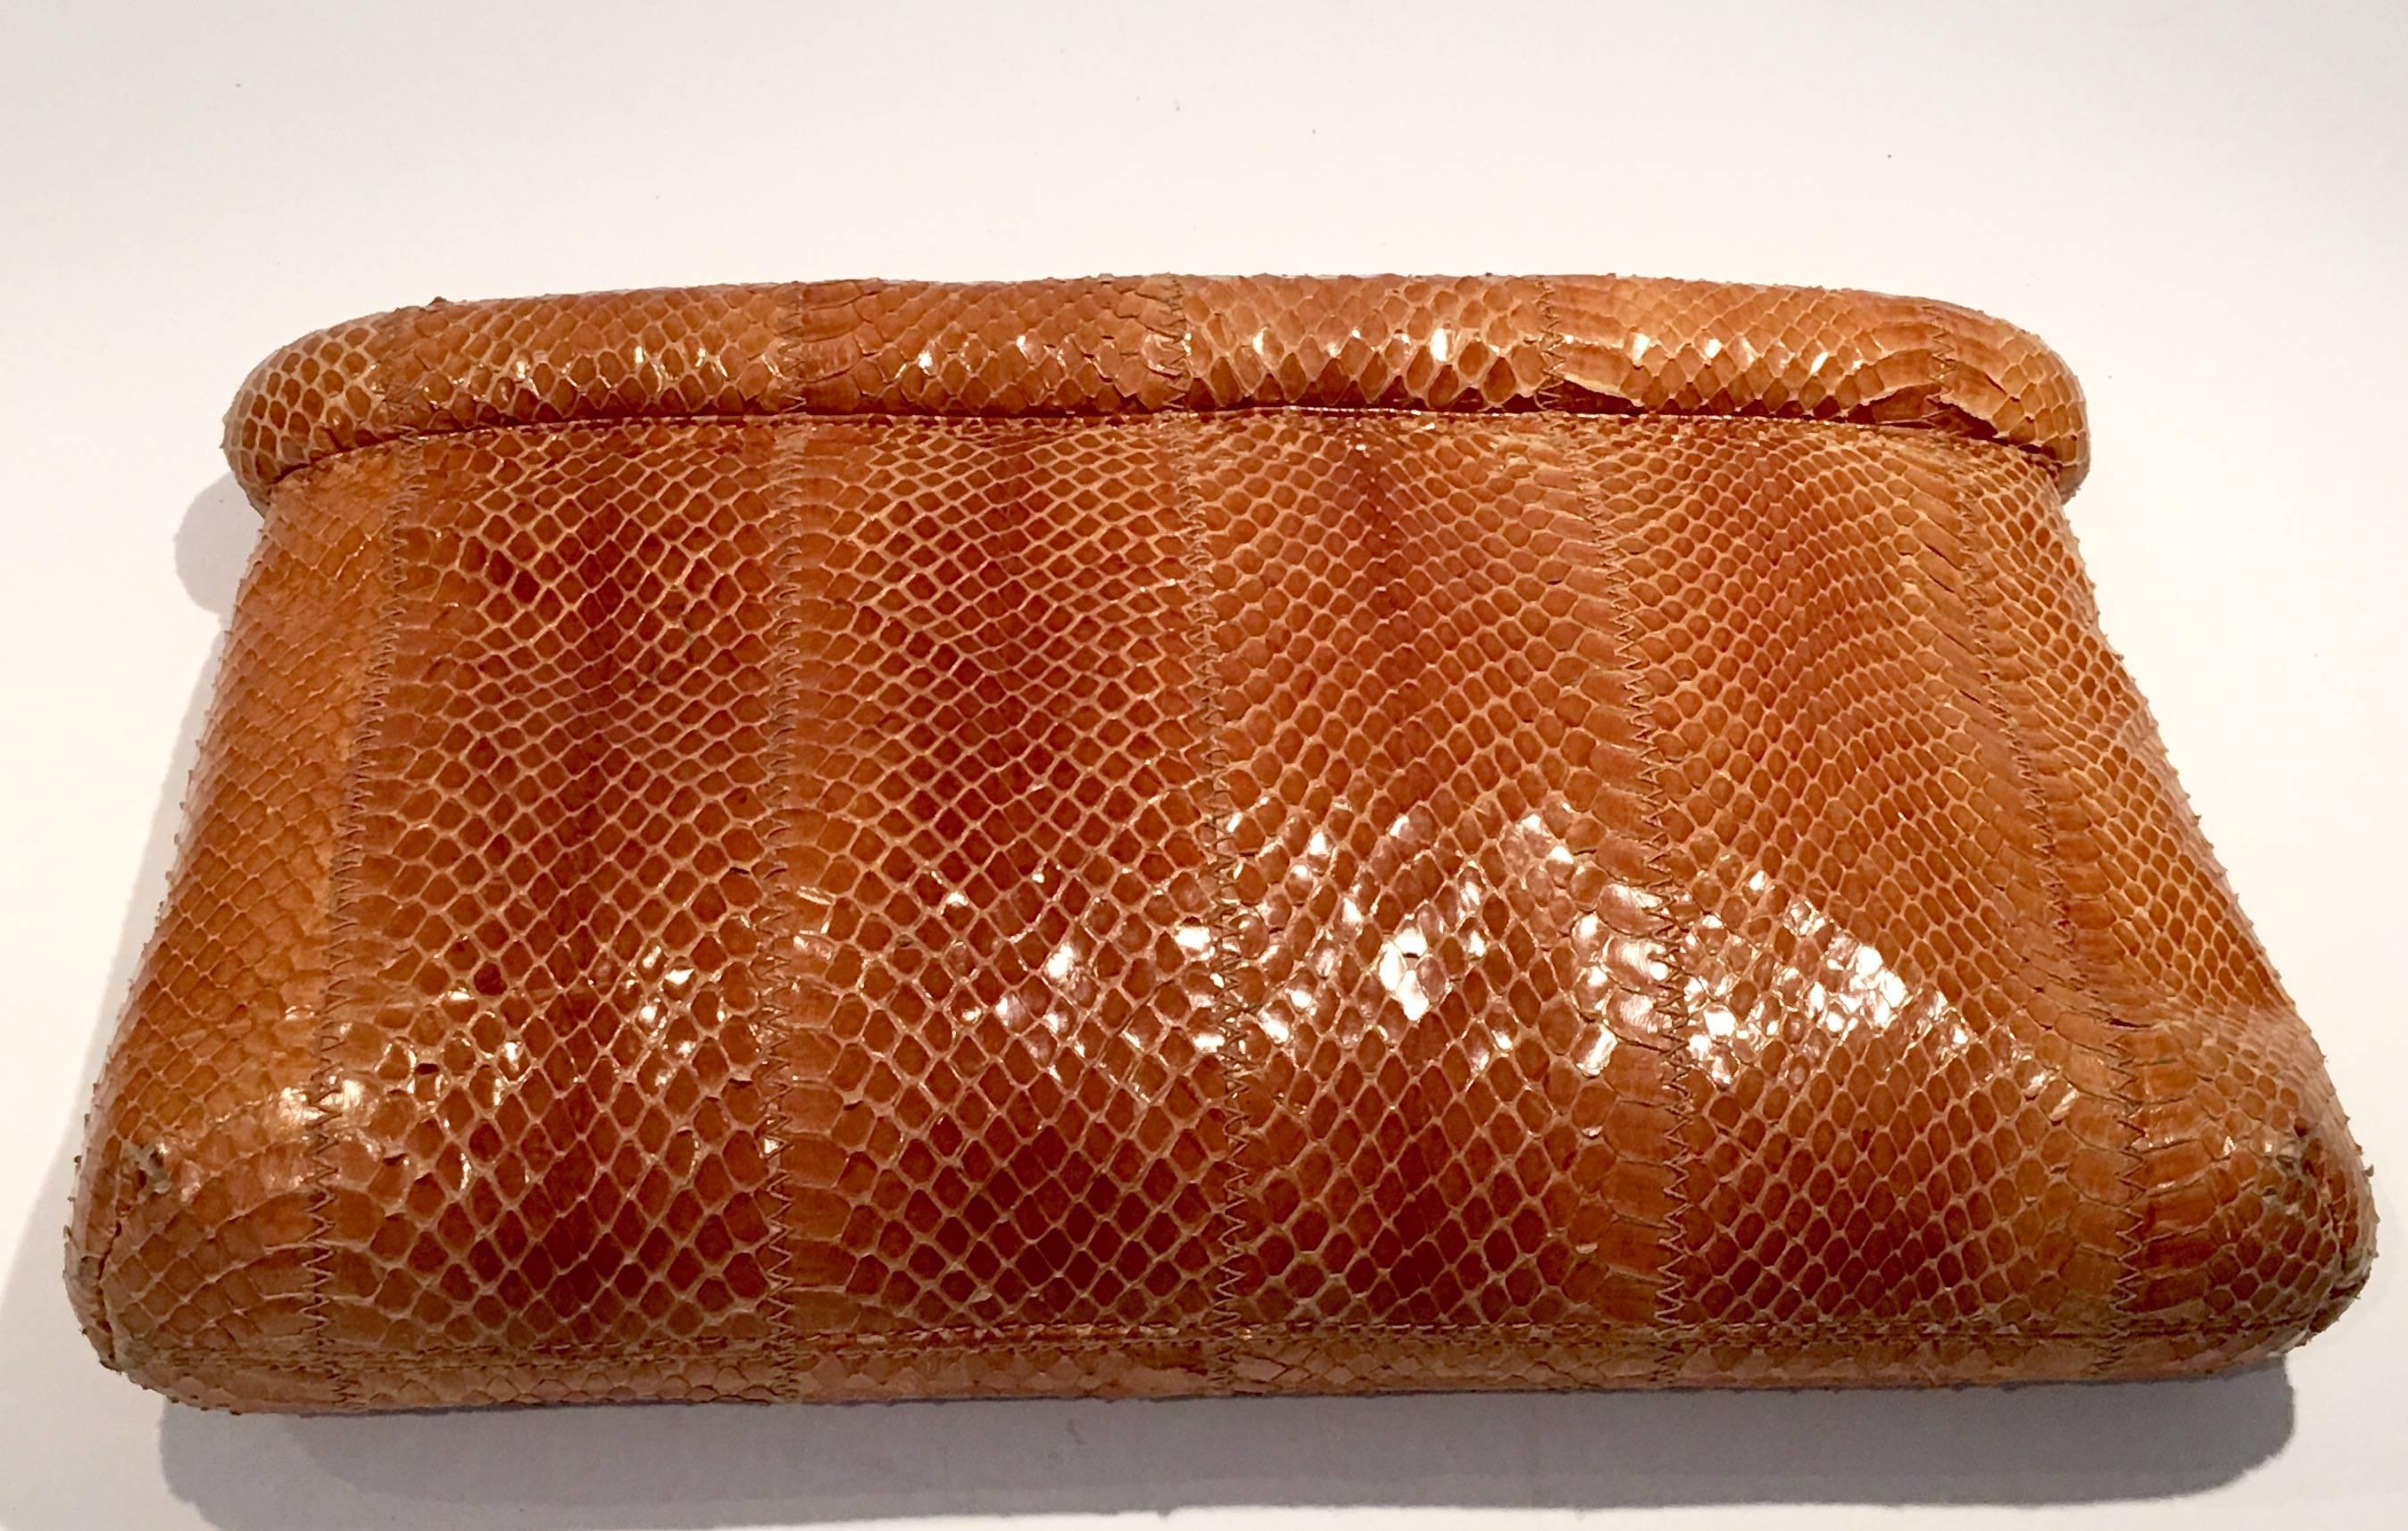 1980s Caramel colored snakeskin envelope style clutch handbag designed by
Susan Gail and made in Spain. Handbag is lined in suede and has one interior pocket with zipper closure.